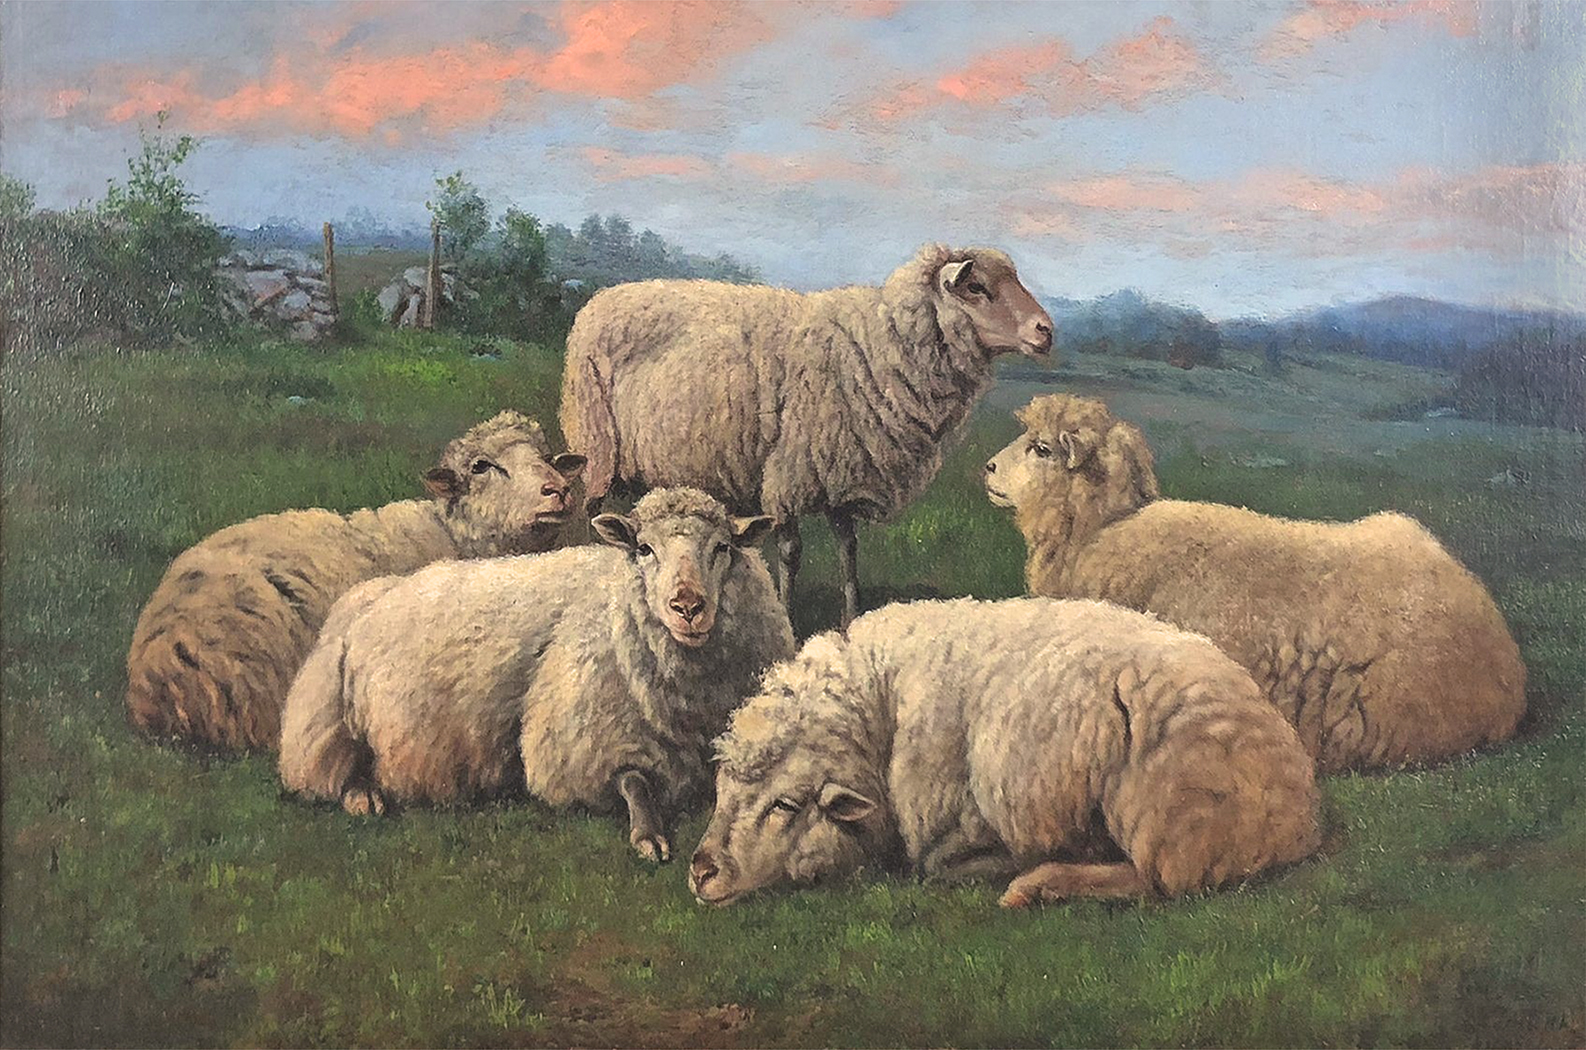 Farm/Pastoral Farm Sheep at Sunrise Oil Painting Reproduction on Canvas